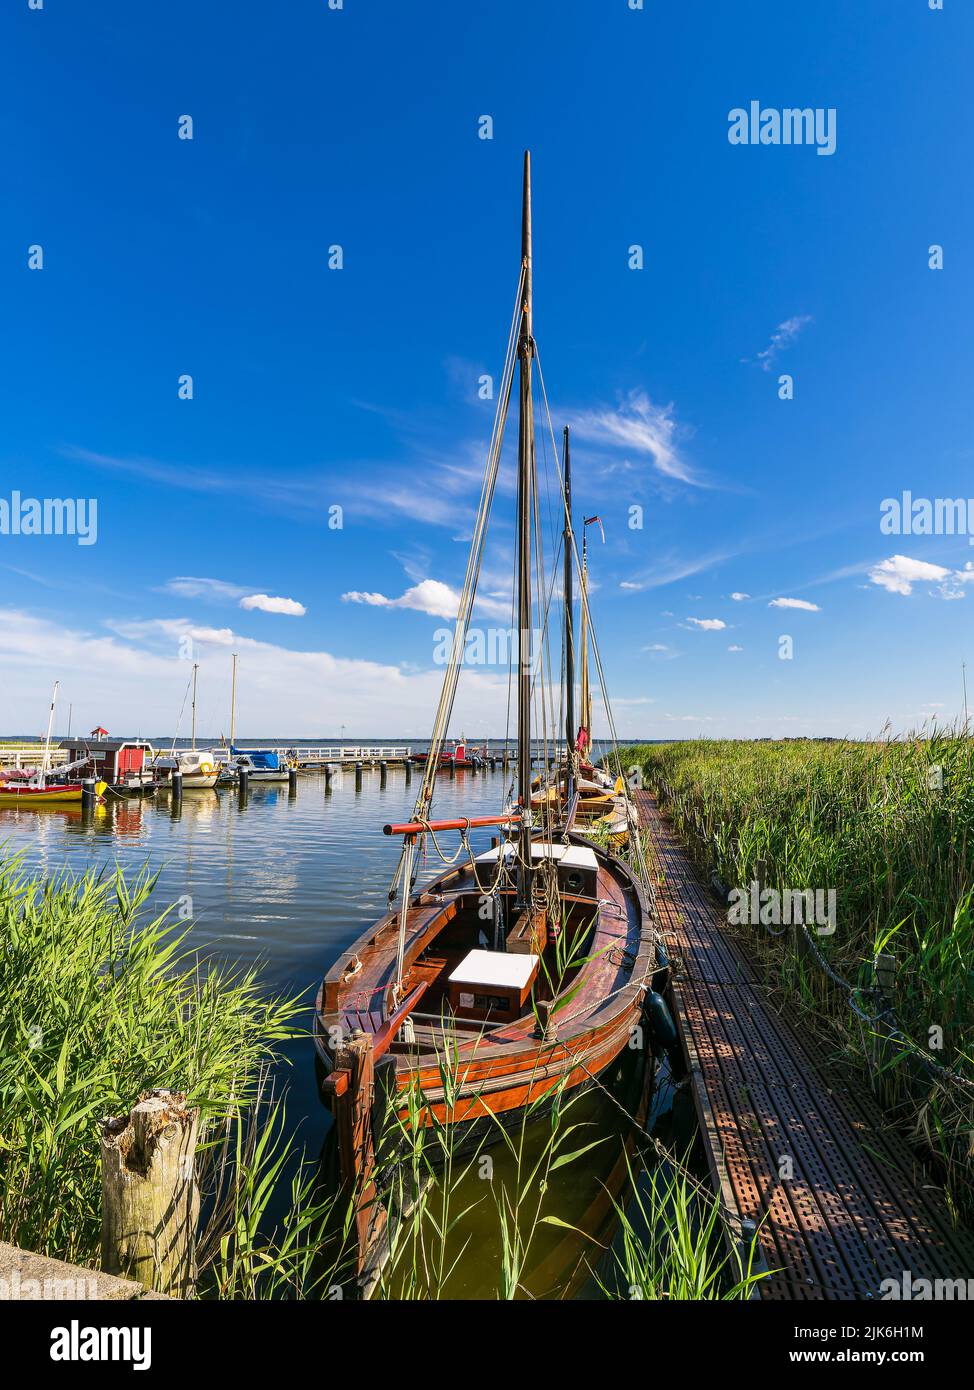 Sailboats in the port of Wieck, Germany. Stock Photo